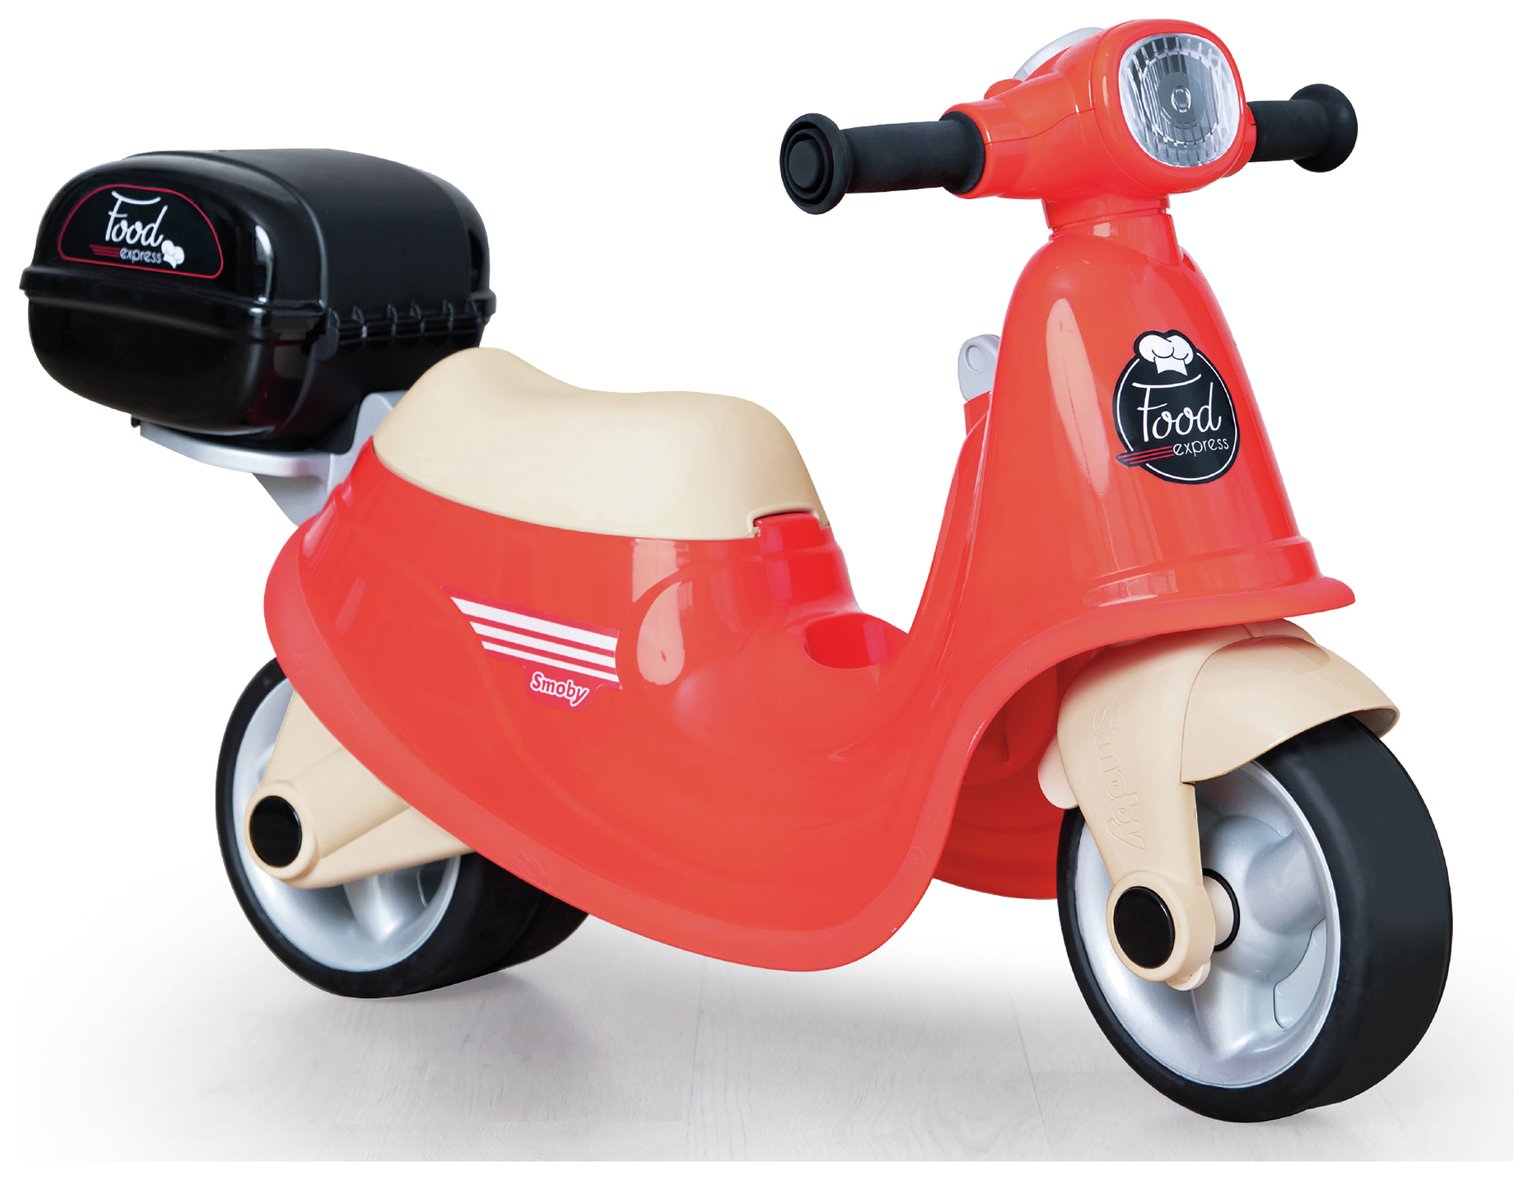 Smoby Food Express Ride On Scooter review